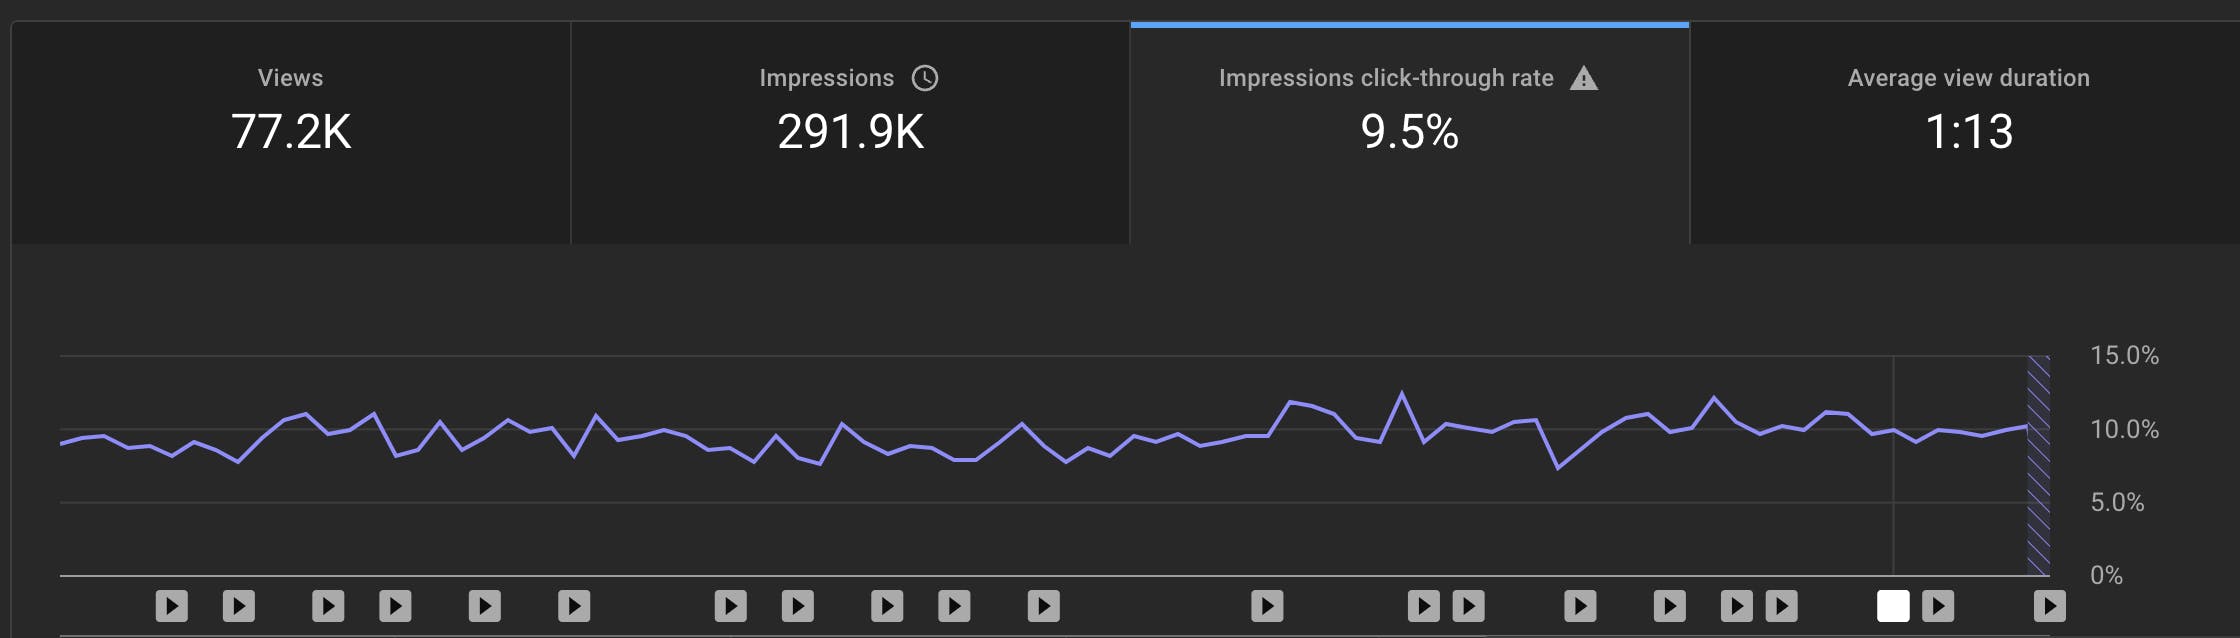 Youtube insights